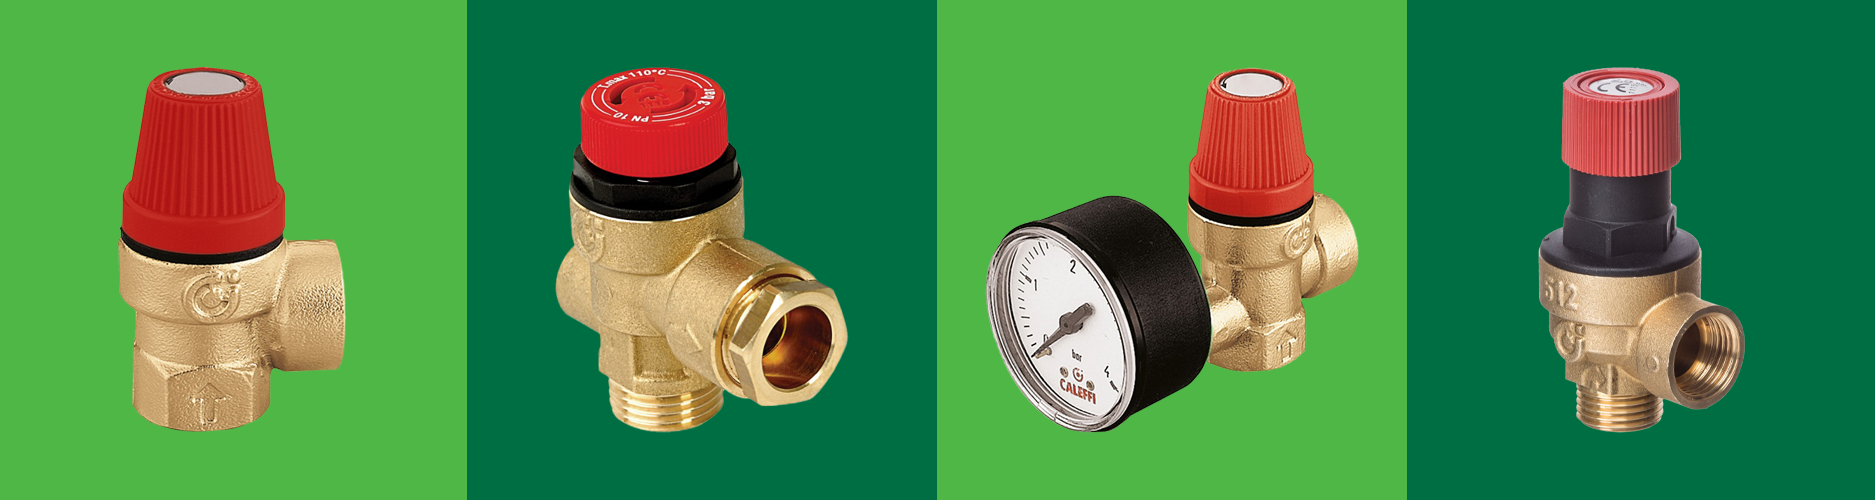 Altecnic & Caleffi Safety Relief Valves available to buy from Safety Valves Online